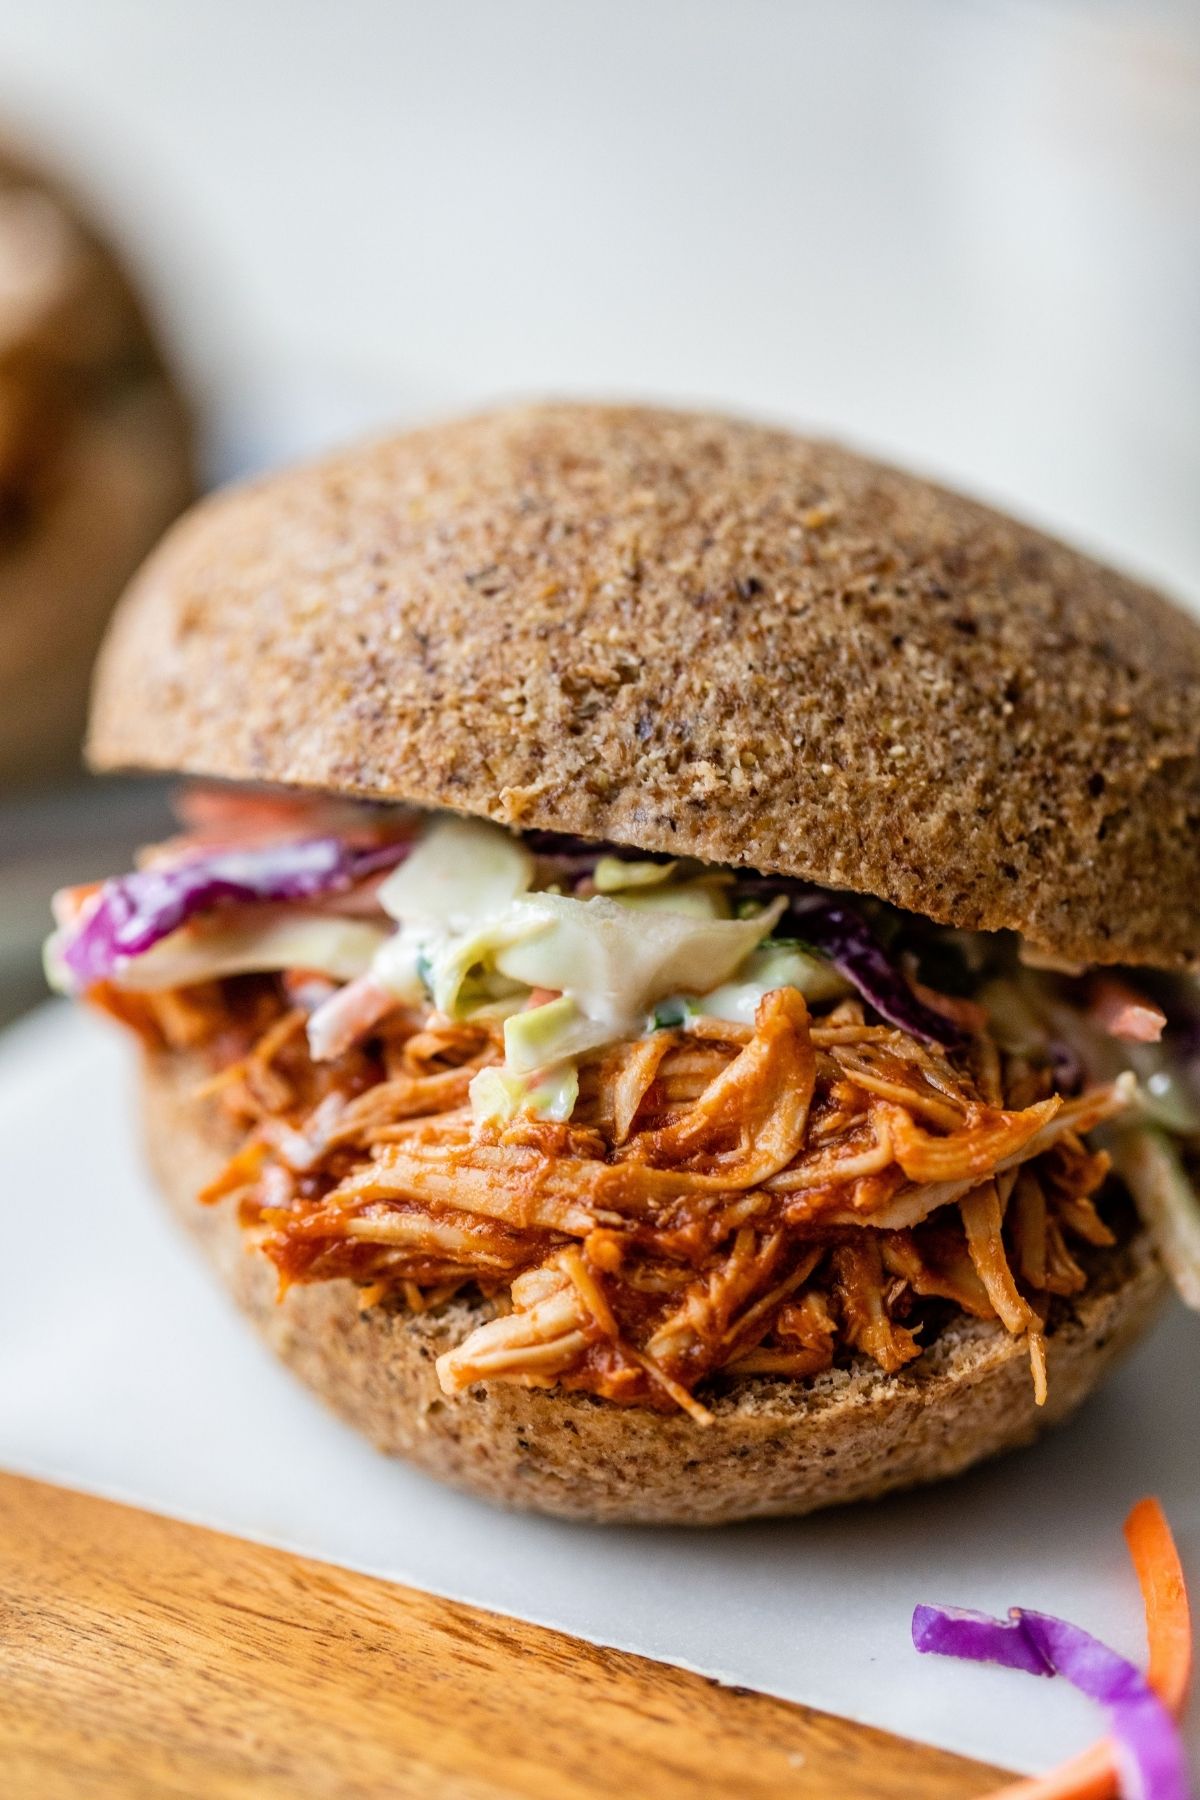 BBQ chicken and coleslaw on a bun.